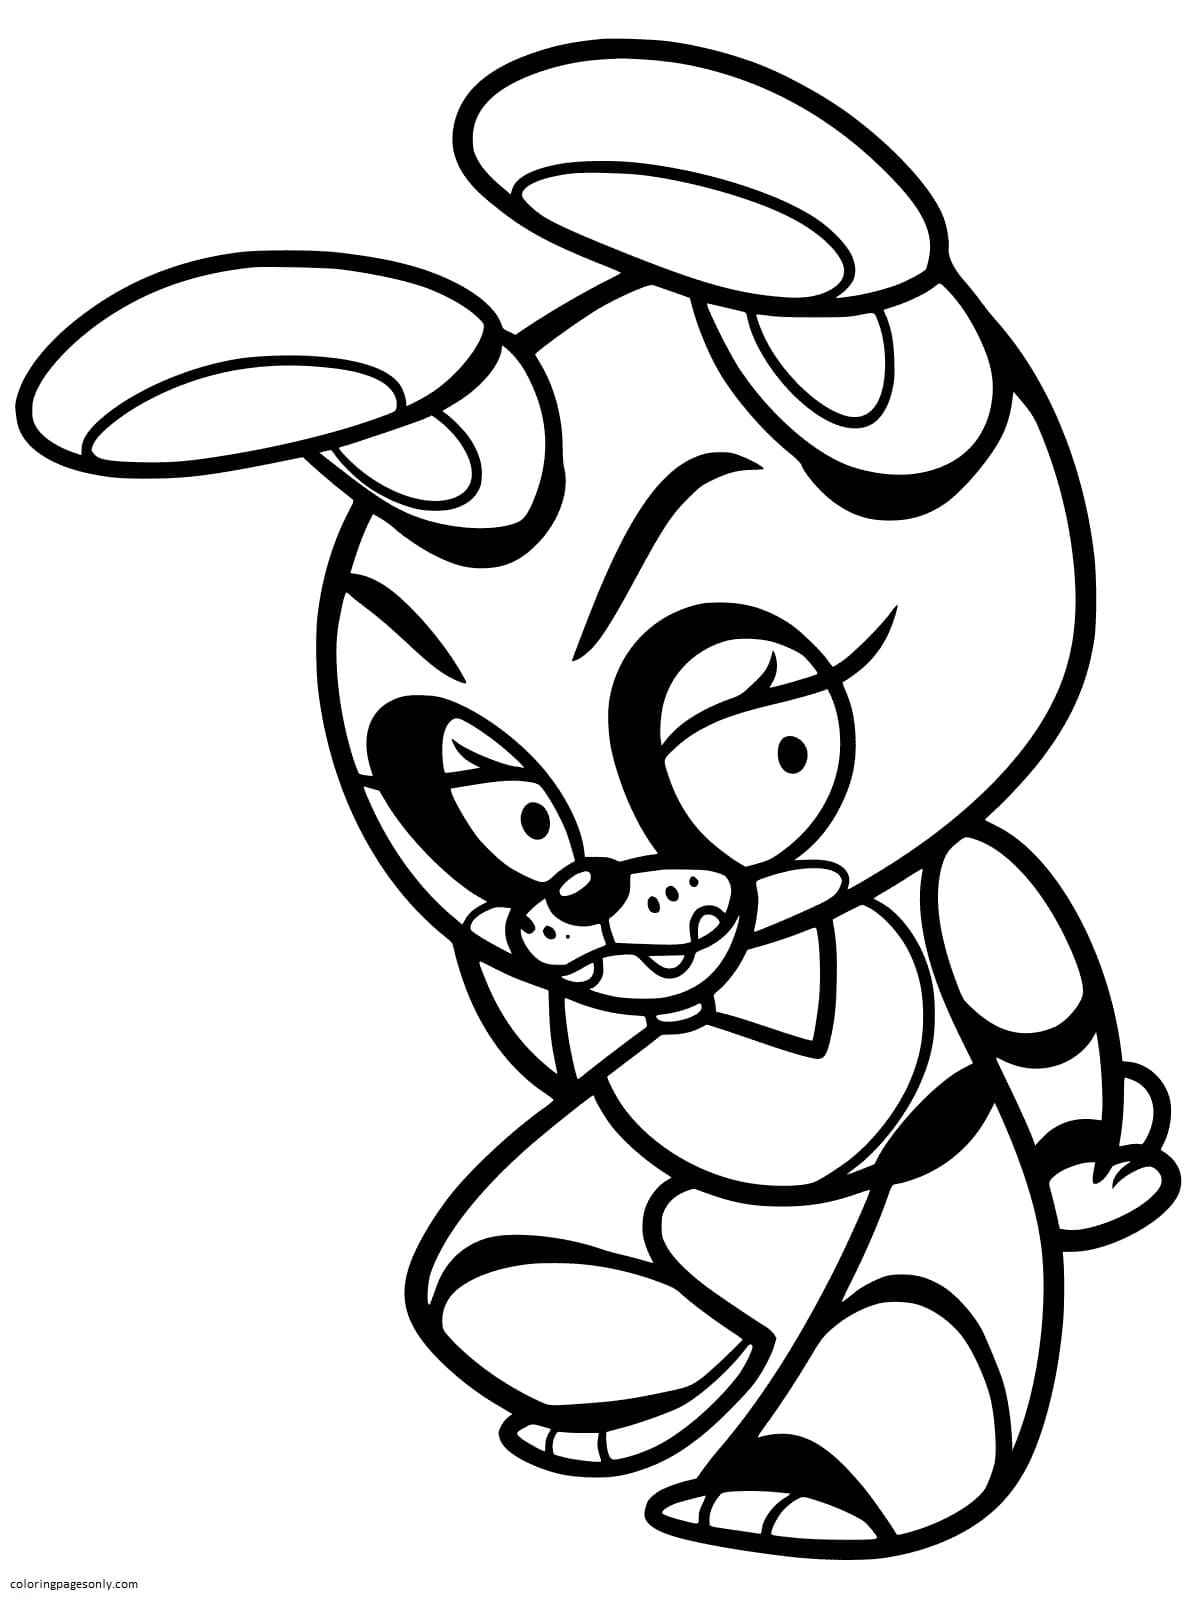 Five Nights at Freddy’s Toy Bonnie Coloring Page